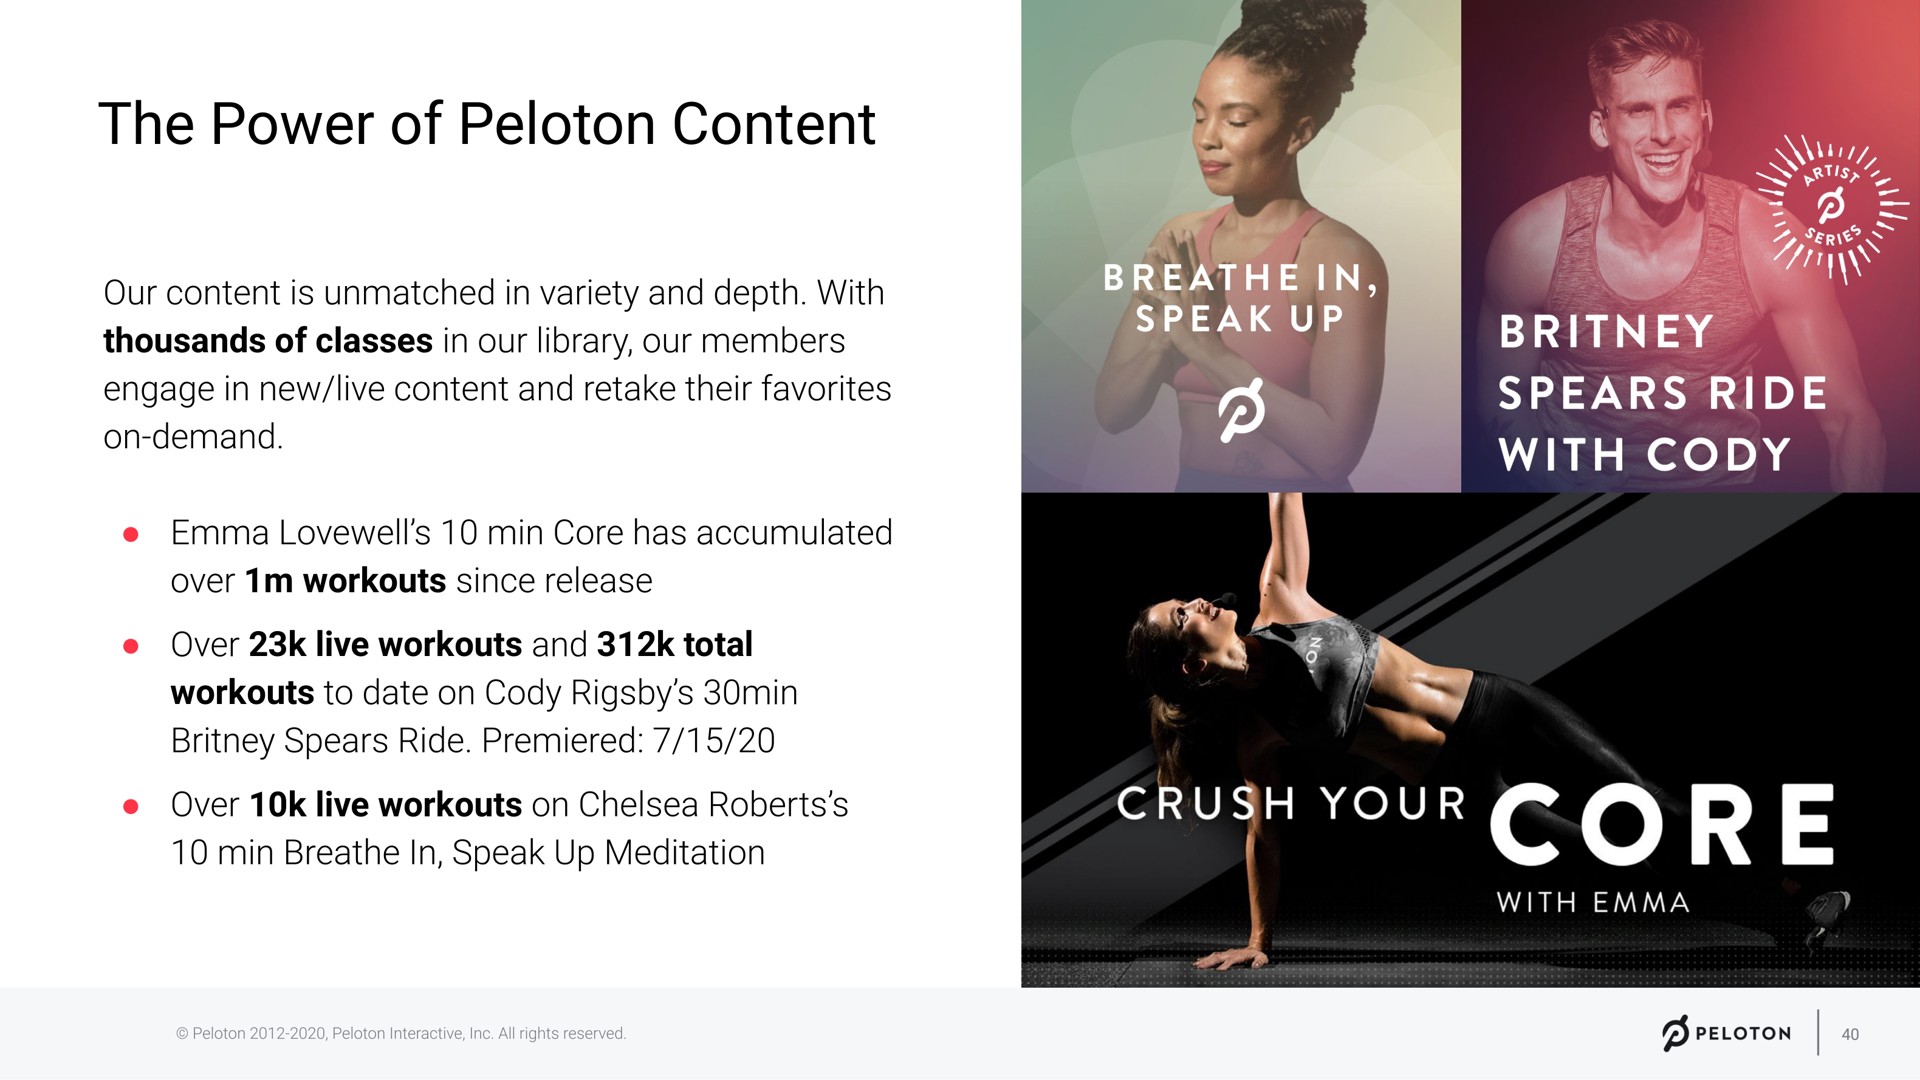 the power of peloton content thousands of classes workouts live workouts total workouts live workouts great street spears ride with | Peloton